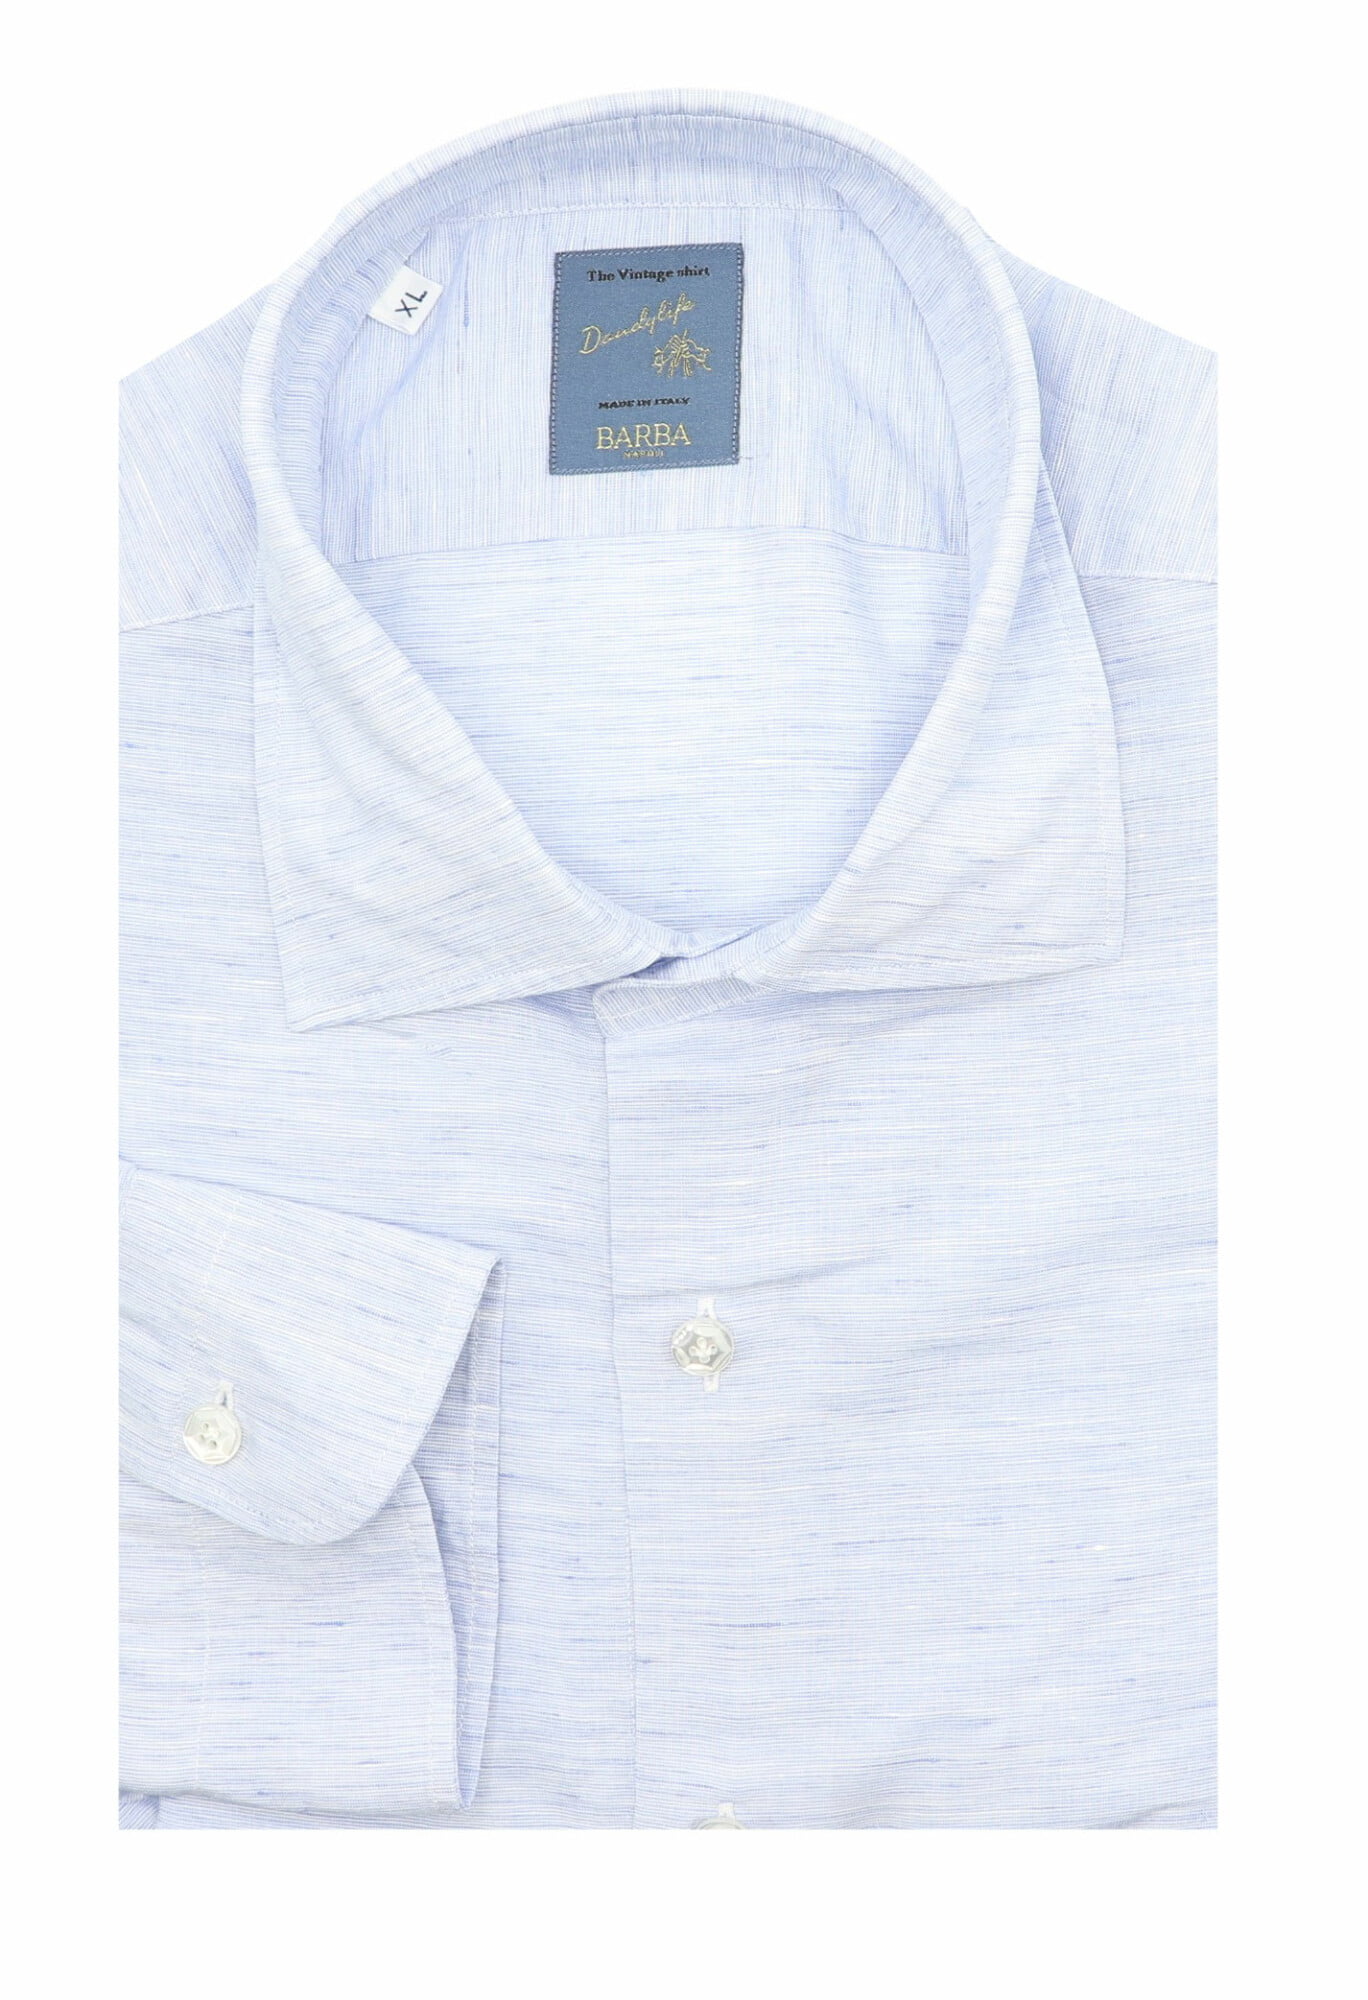 Barba Napoli Cotton Shirt in Blue for Men Mens Clothing Shirts Casual shirts and button-up shirts 